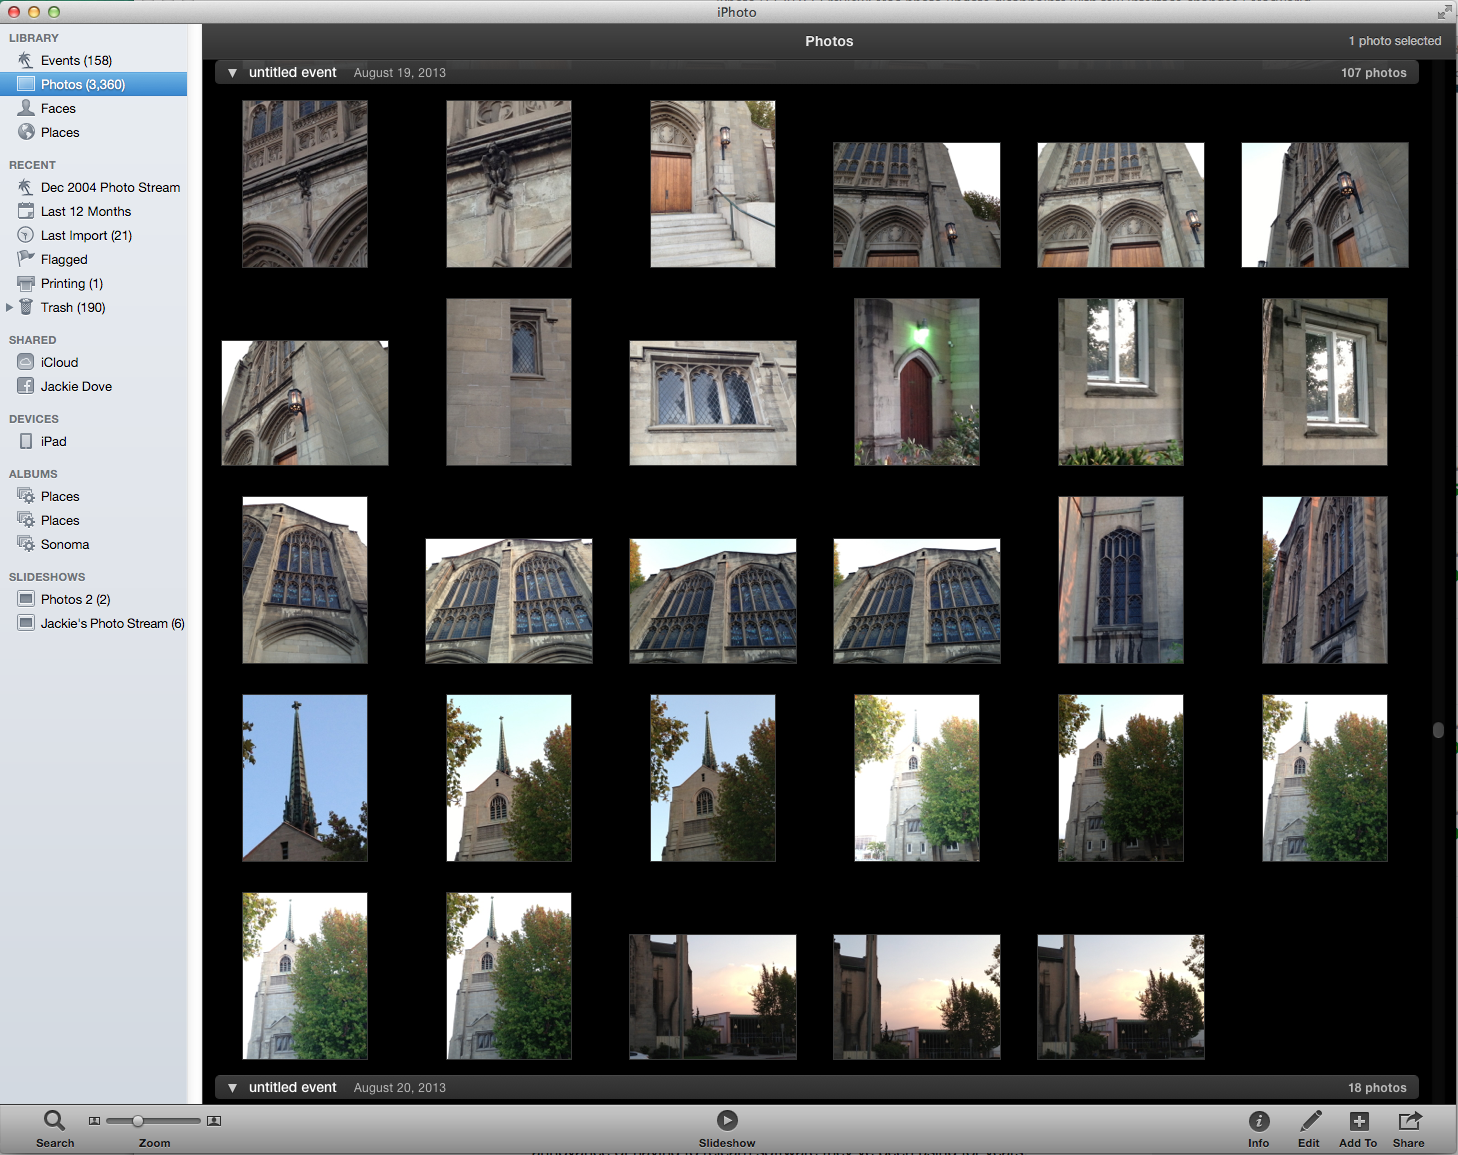 Slideshow themes for iphoto 11 torrent torrentrapido brown